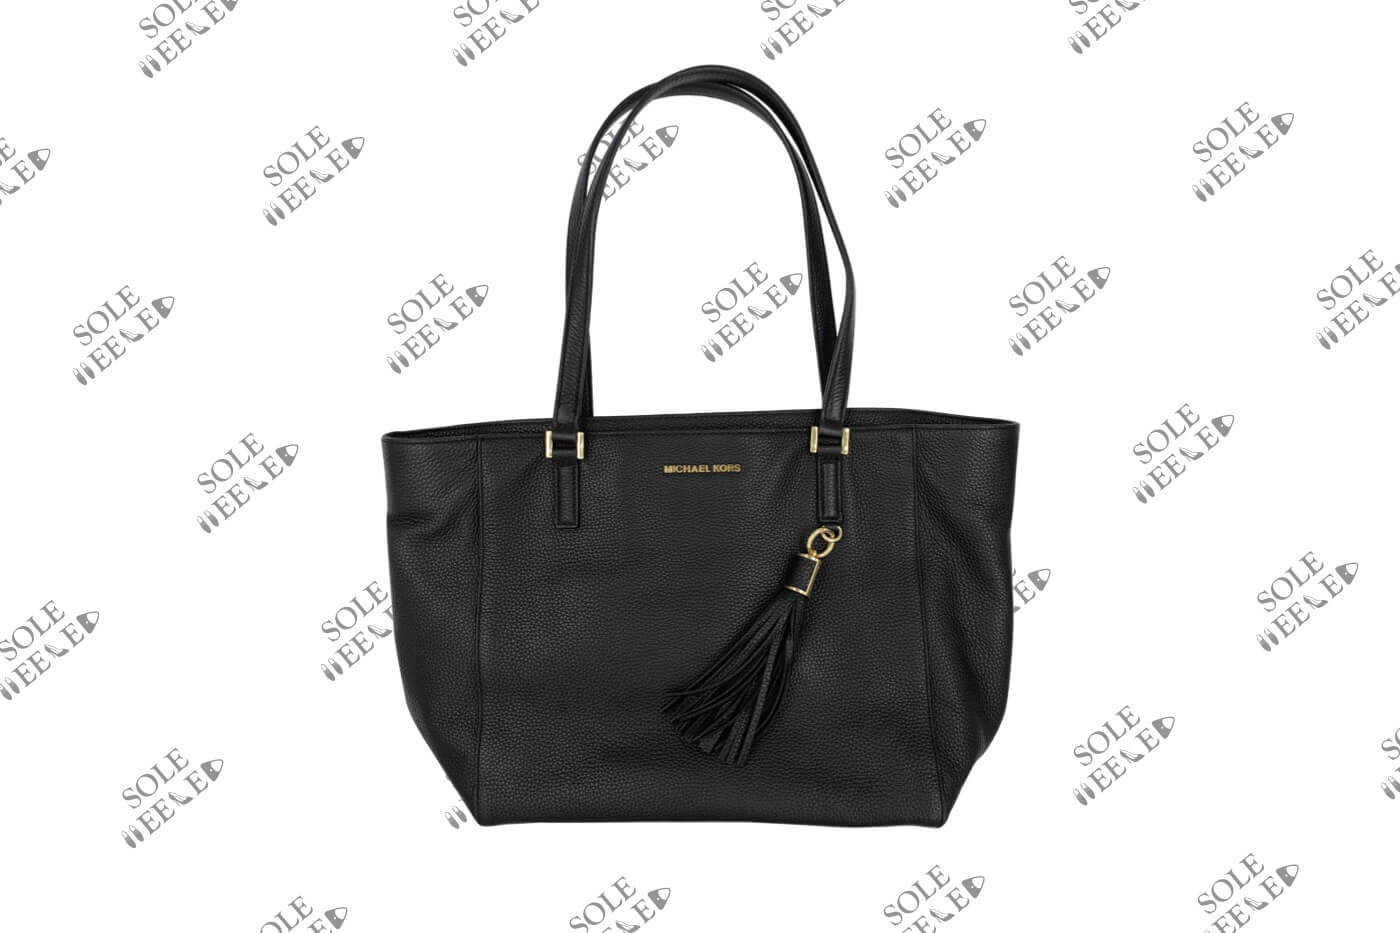 michael kors purse with long strap